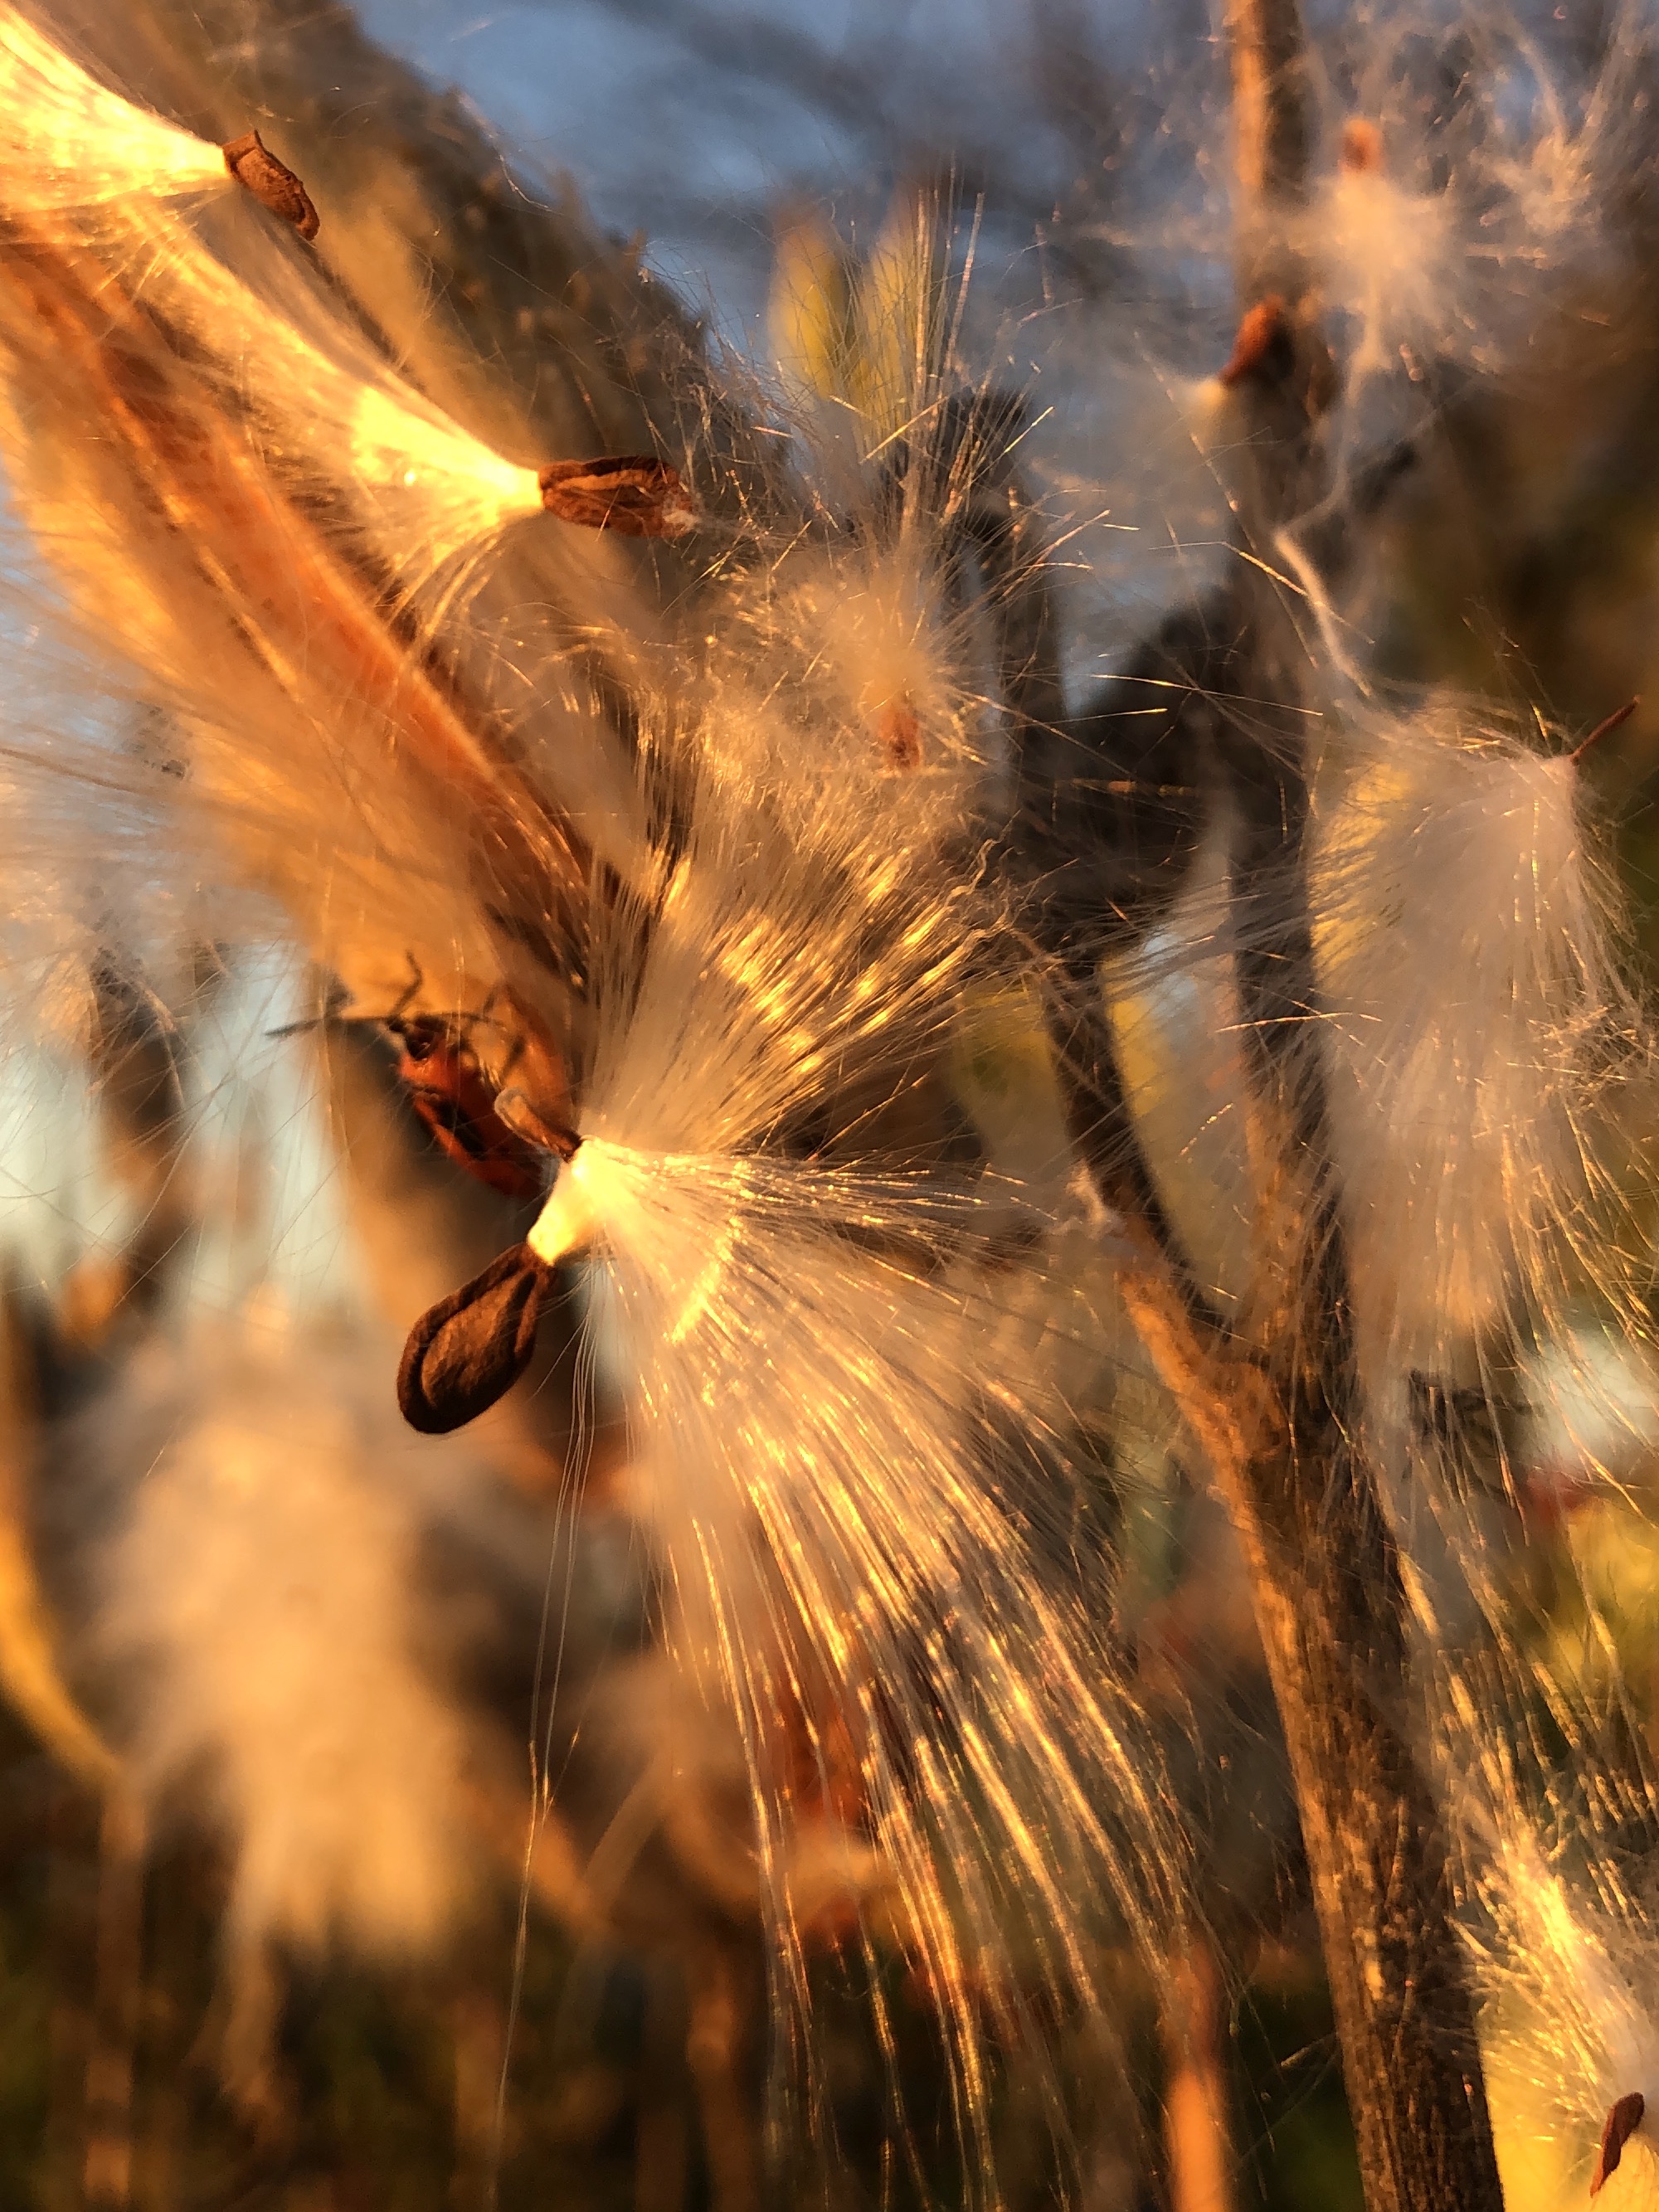 Common Milkweed by Wingra Boats on October 19, 2021.